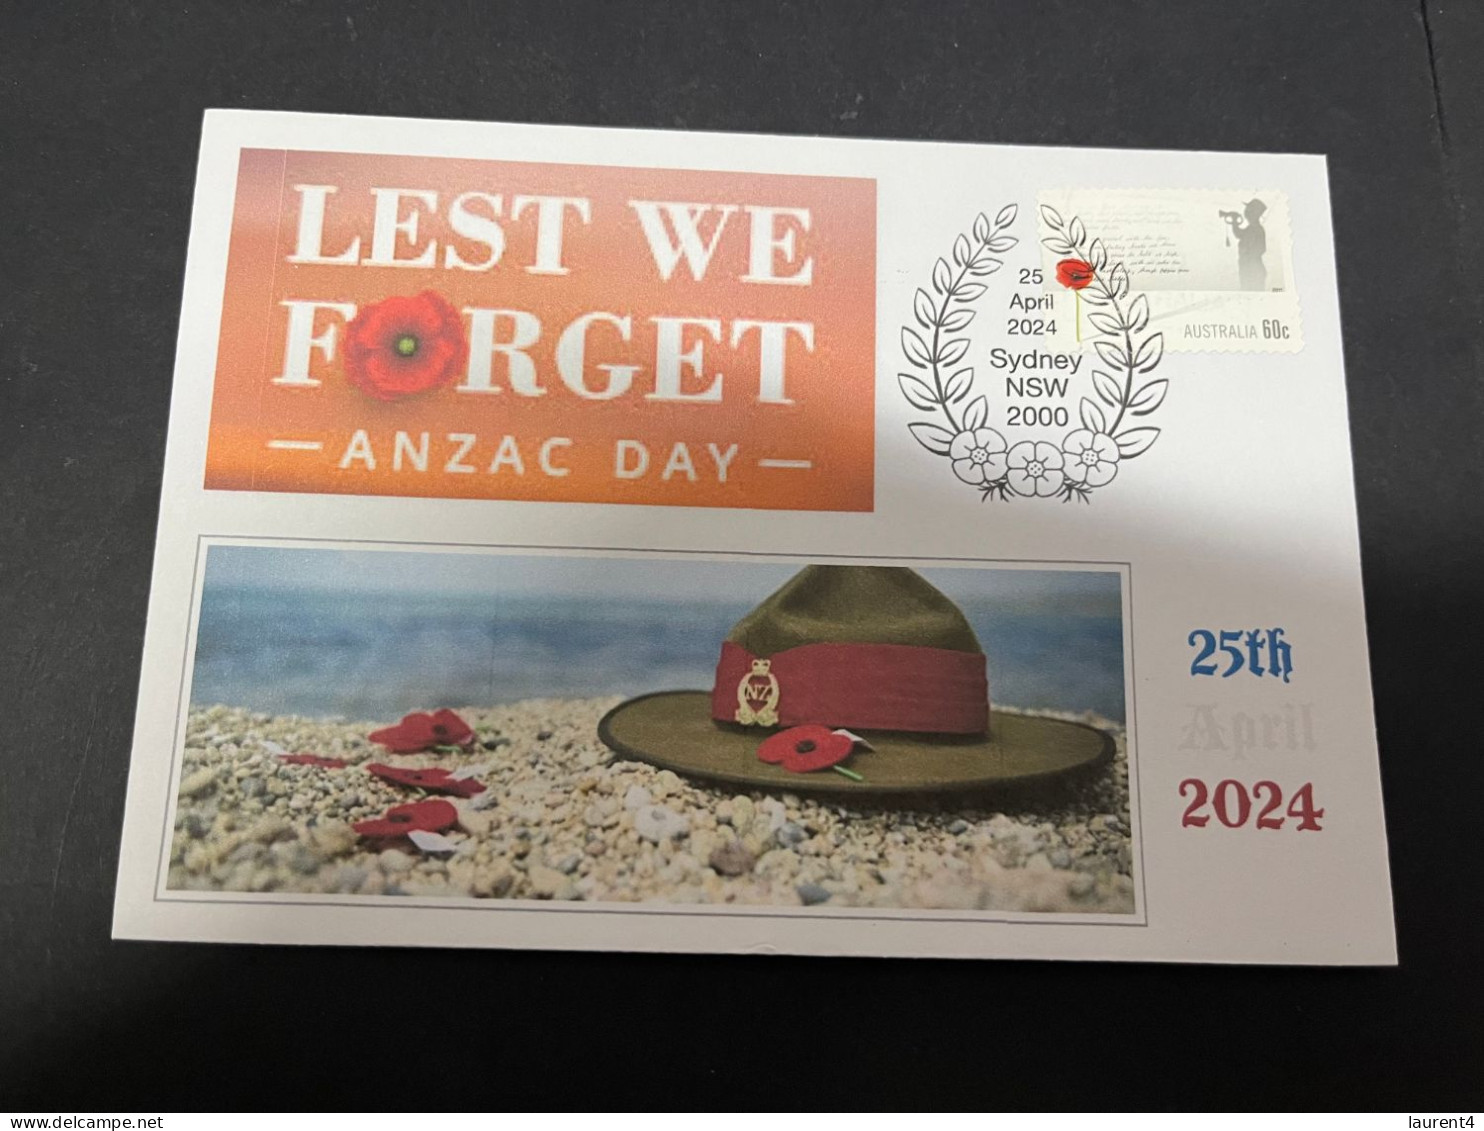 24-4-2024 (2 Z 52) Australia ANZAC 2024 - Special Cover Postmarked 25 April 2024 (Let's We Forget NZ Hat) - Militaria